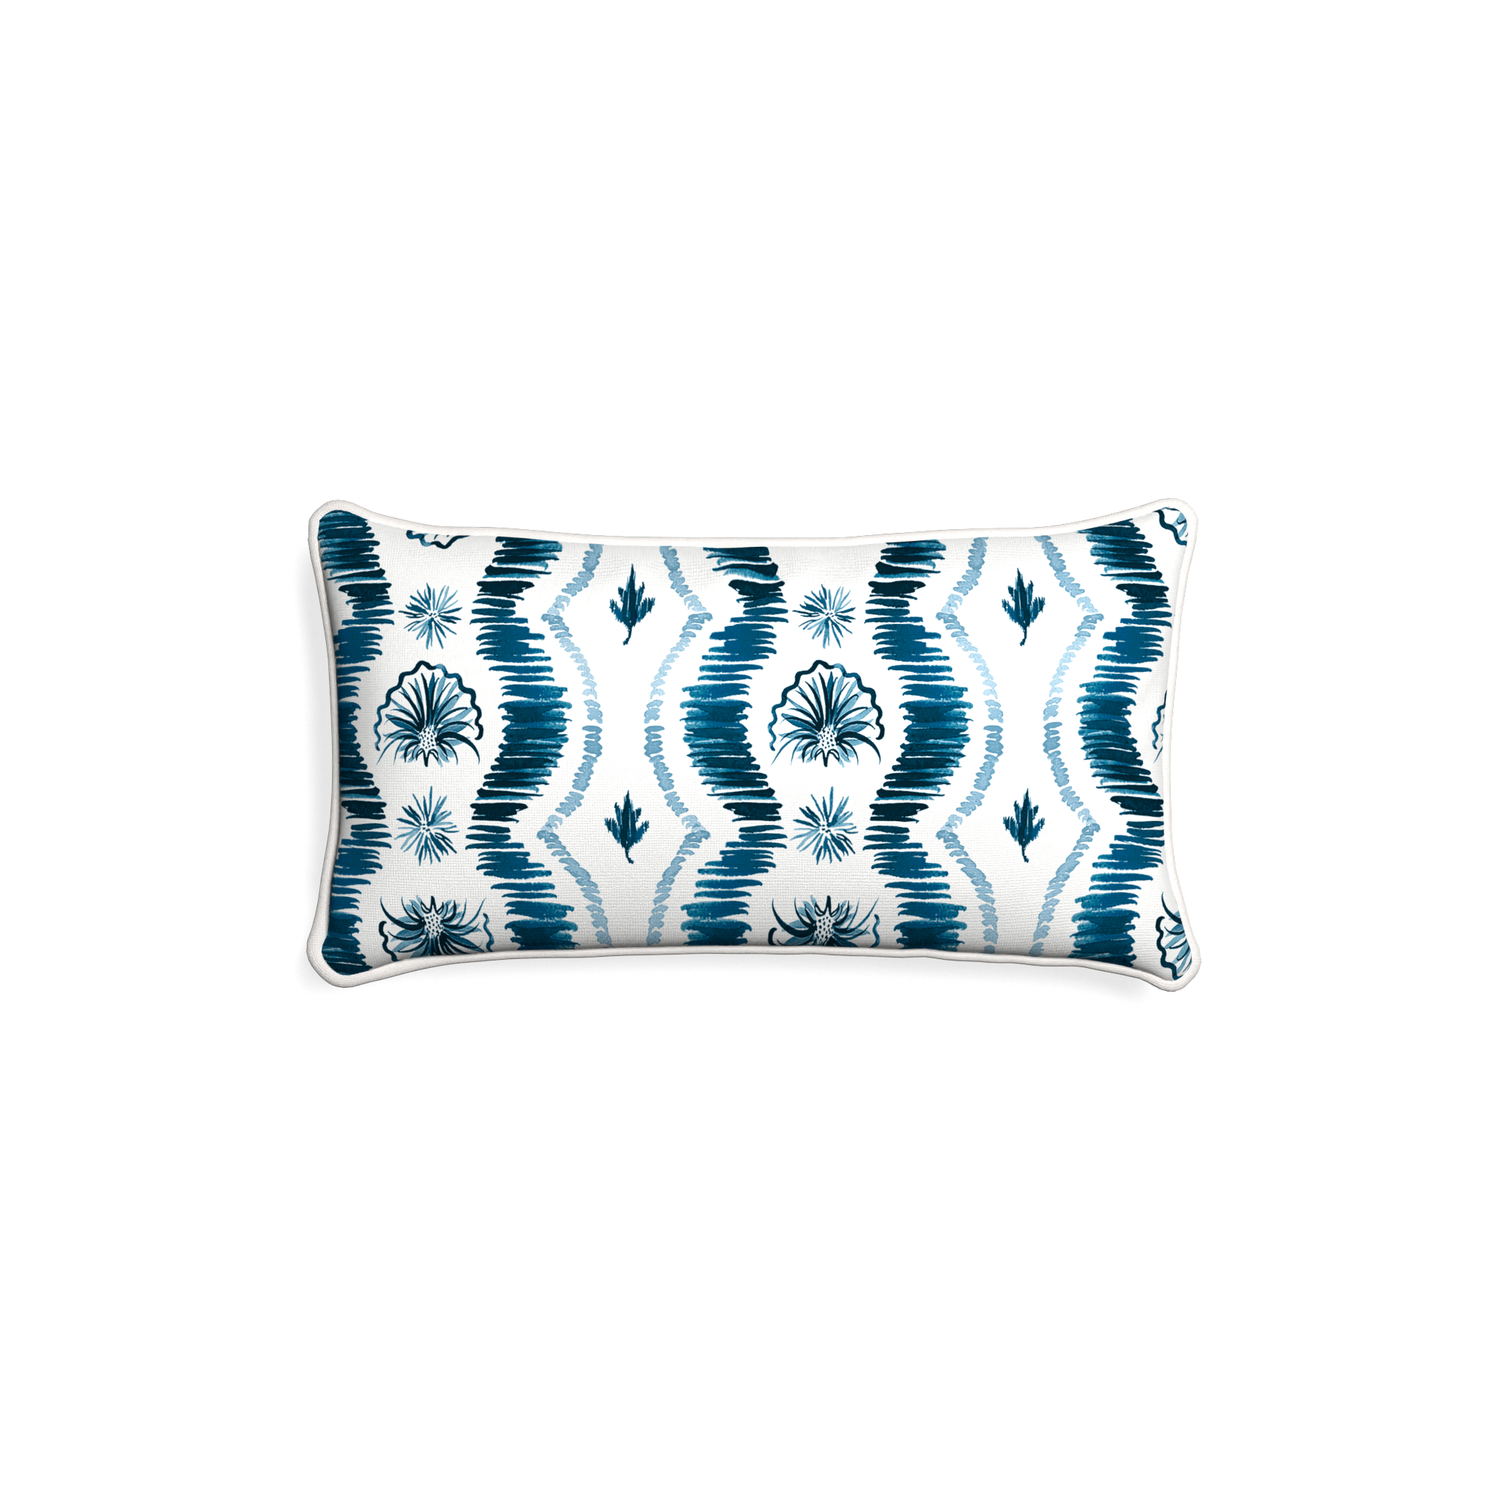 Petite-lumbar alice custom blue ikatpillow with snow piping on white background